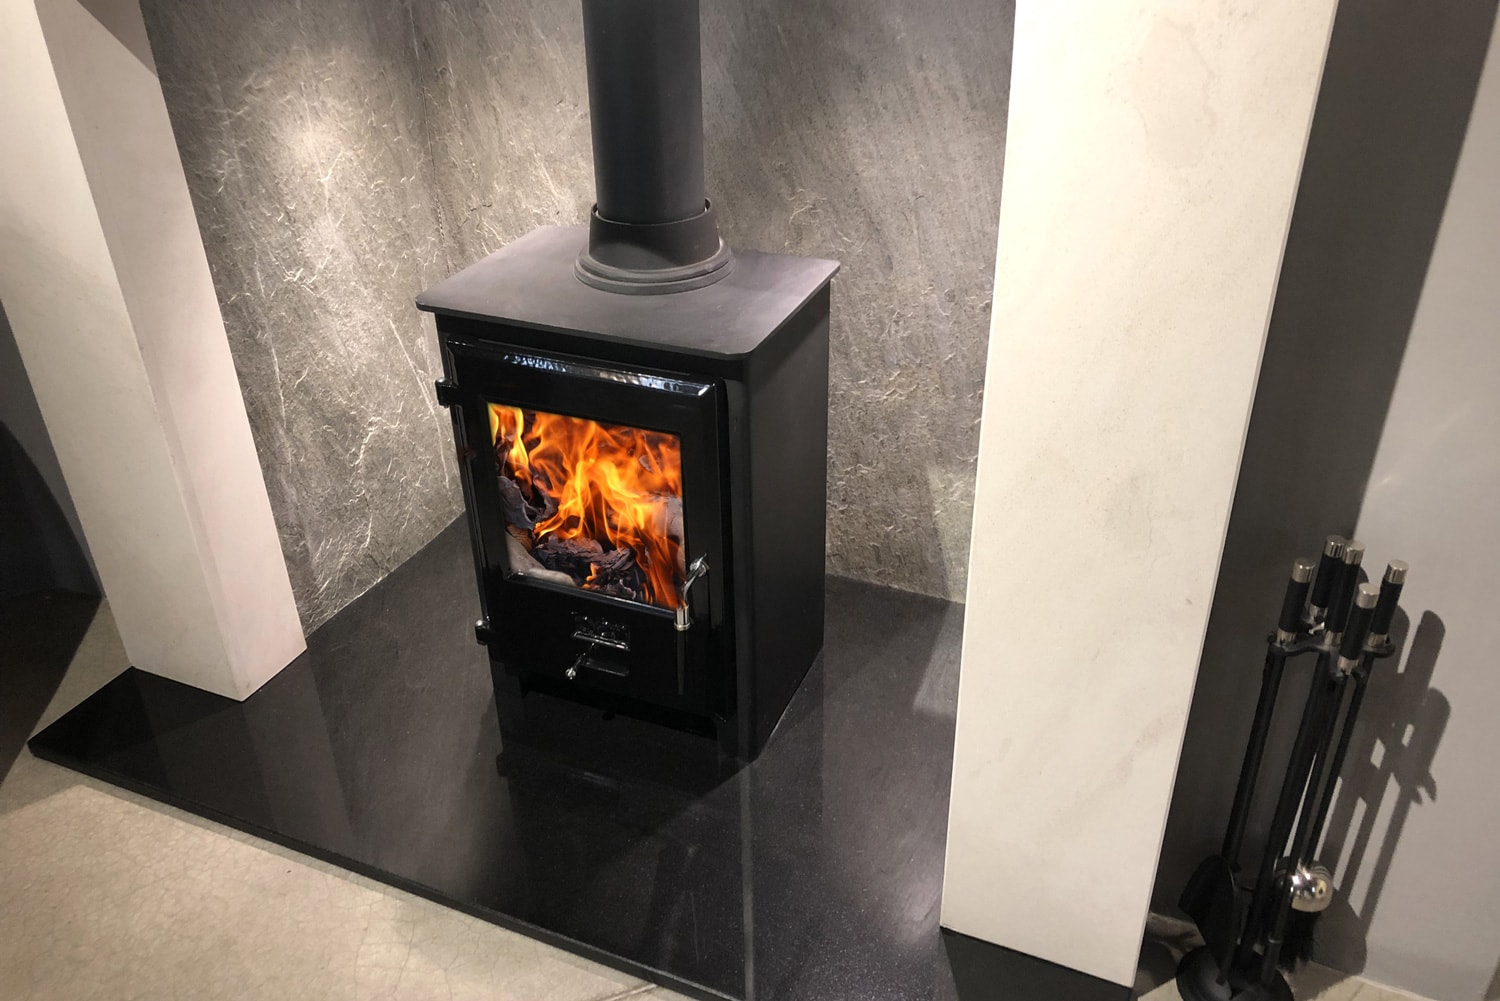 Image of square cast iron woodburner contemporary log wood burning stove fireplace mantle with orange fire flames burning and generating heat to warm up room instead of gas boiler central heating, modern multifuel stove wood burner stand chimney flue